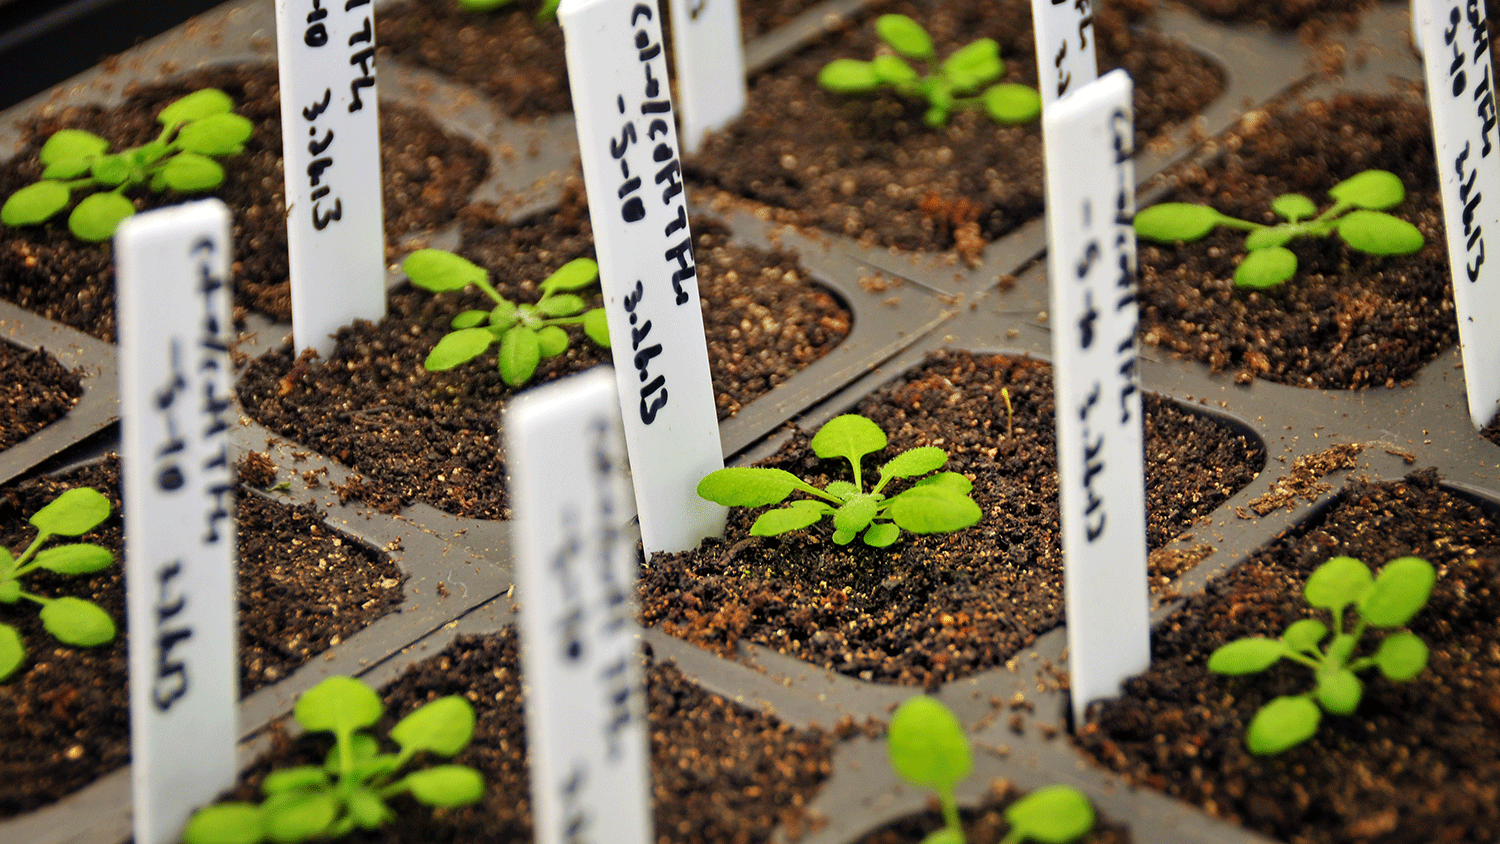 Seedlings with tags